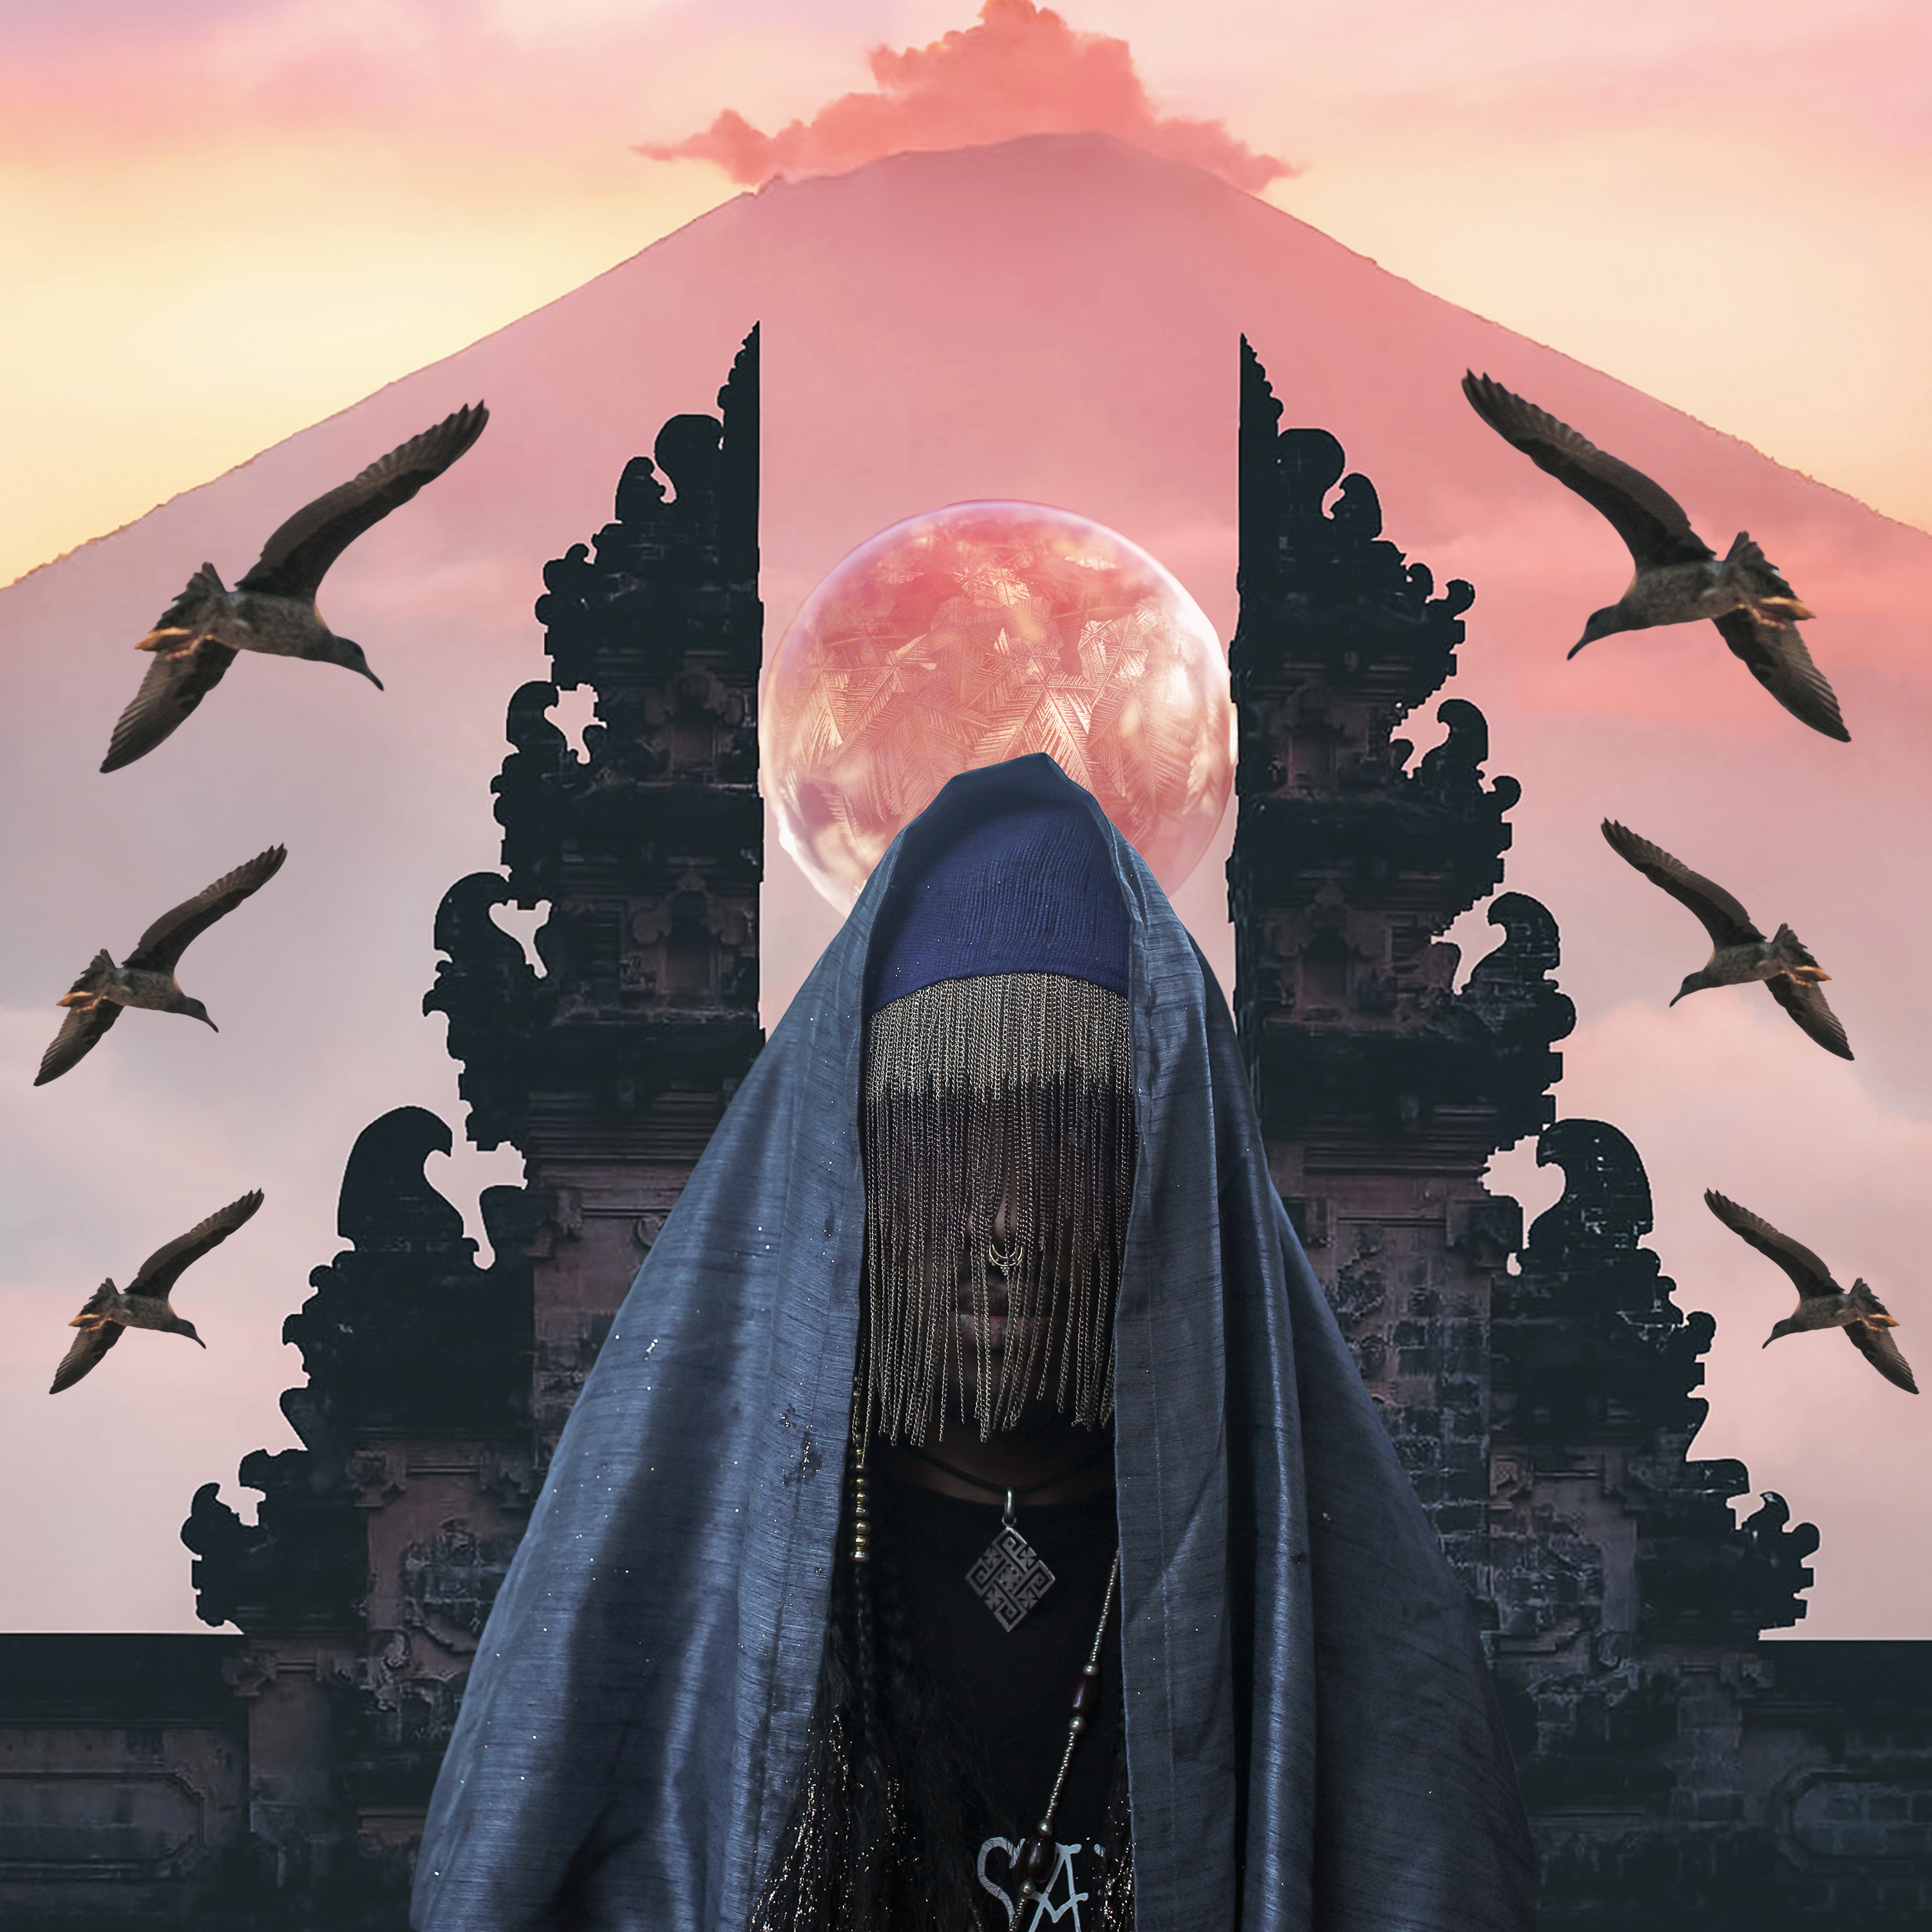 digital collage depicting a veiled woman against backdrop of birds and a pink volcano